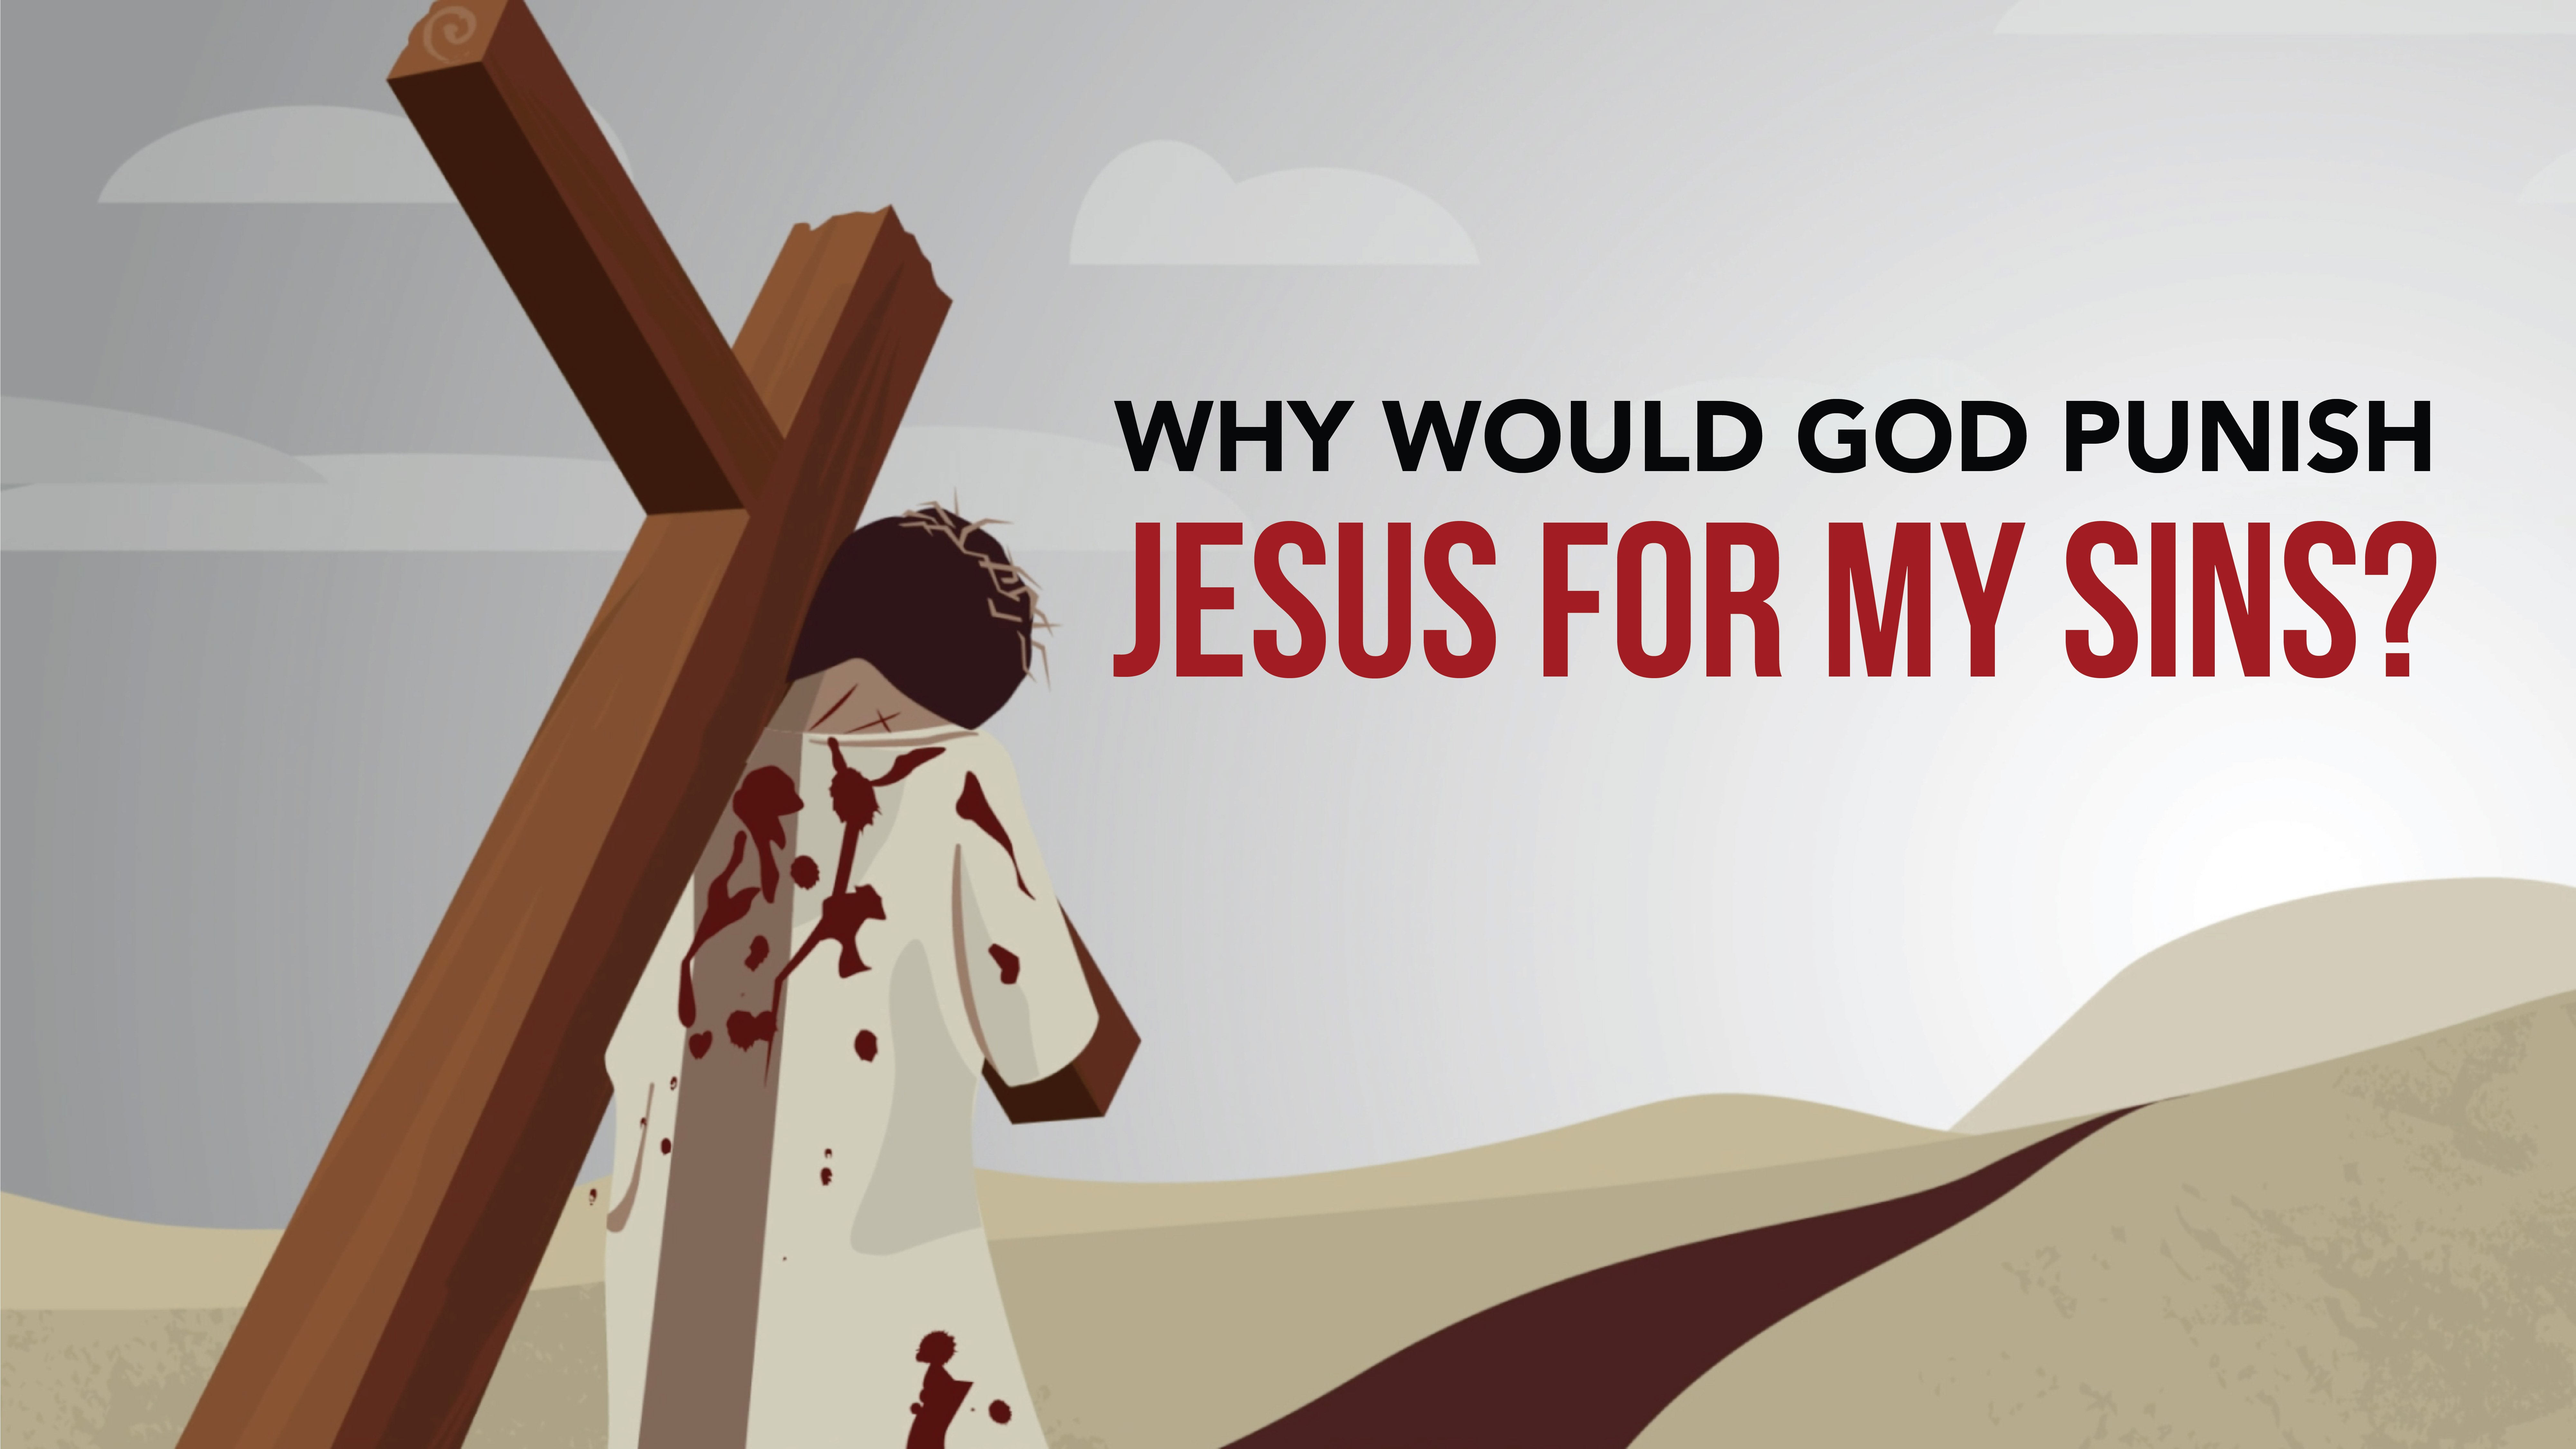 Why Would God Punish Jesus for My Sins?